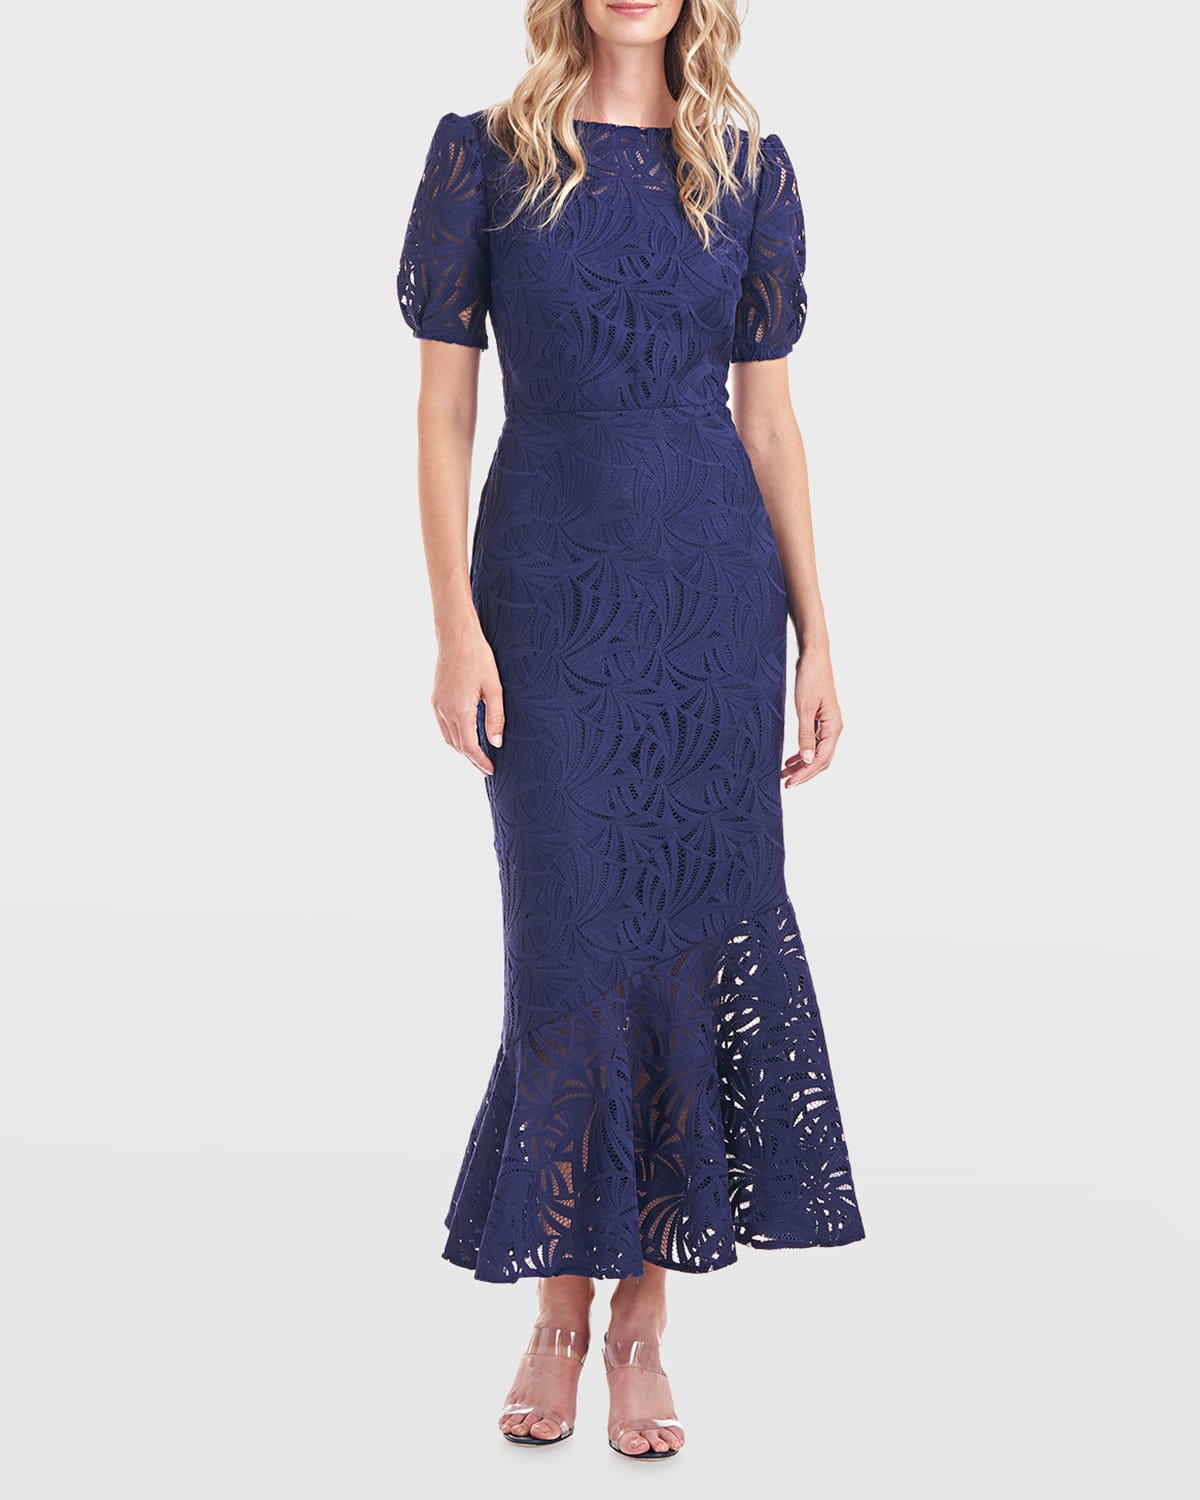 Kay Unger New York Zoey Puff-Sleeve Lace Dress